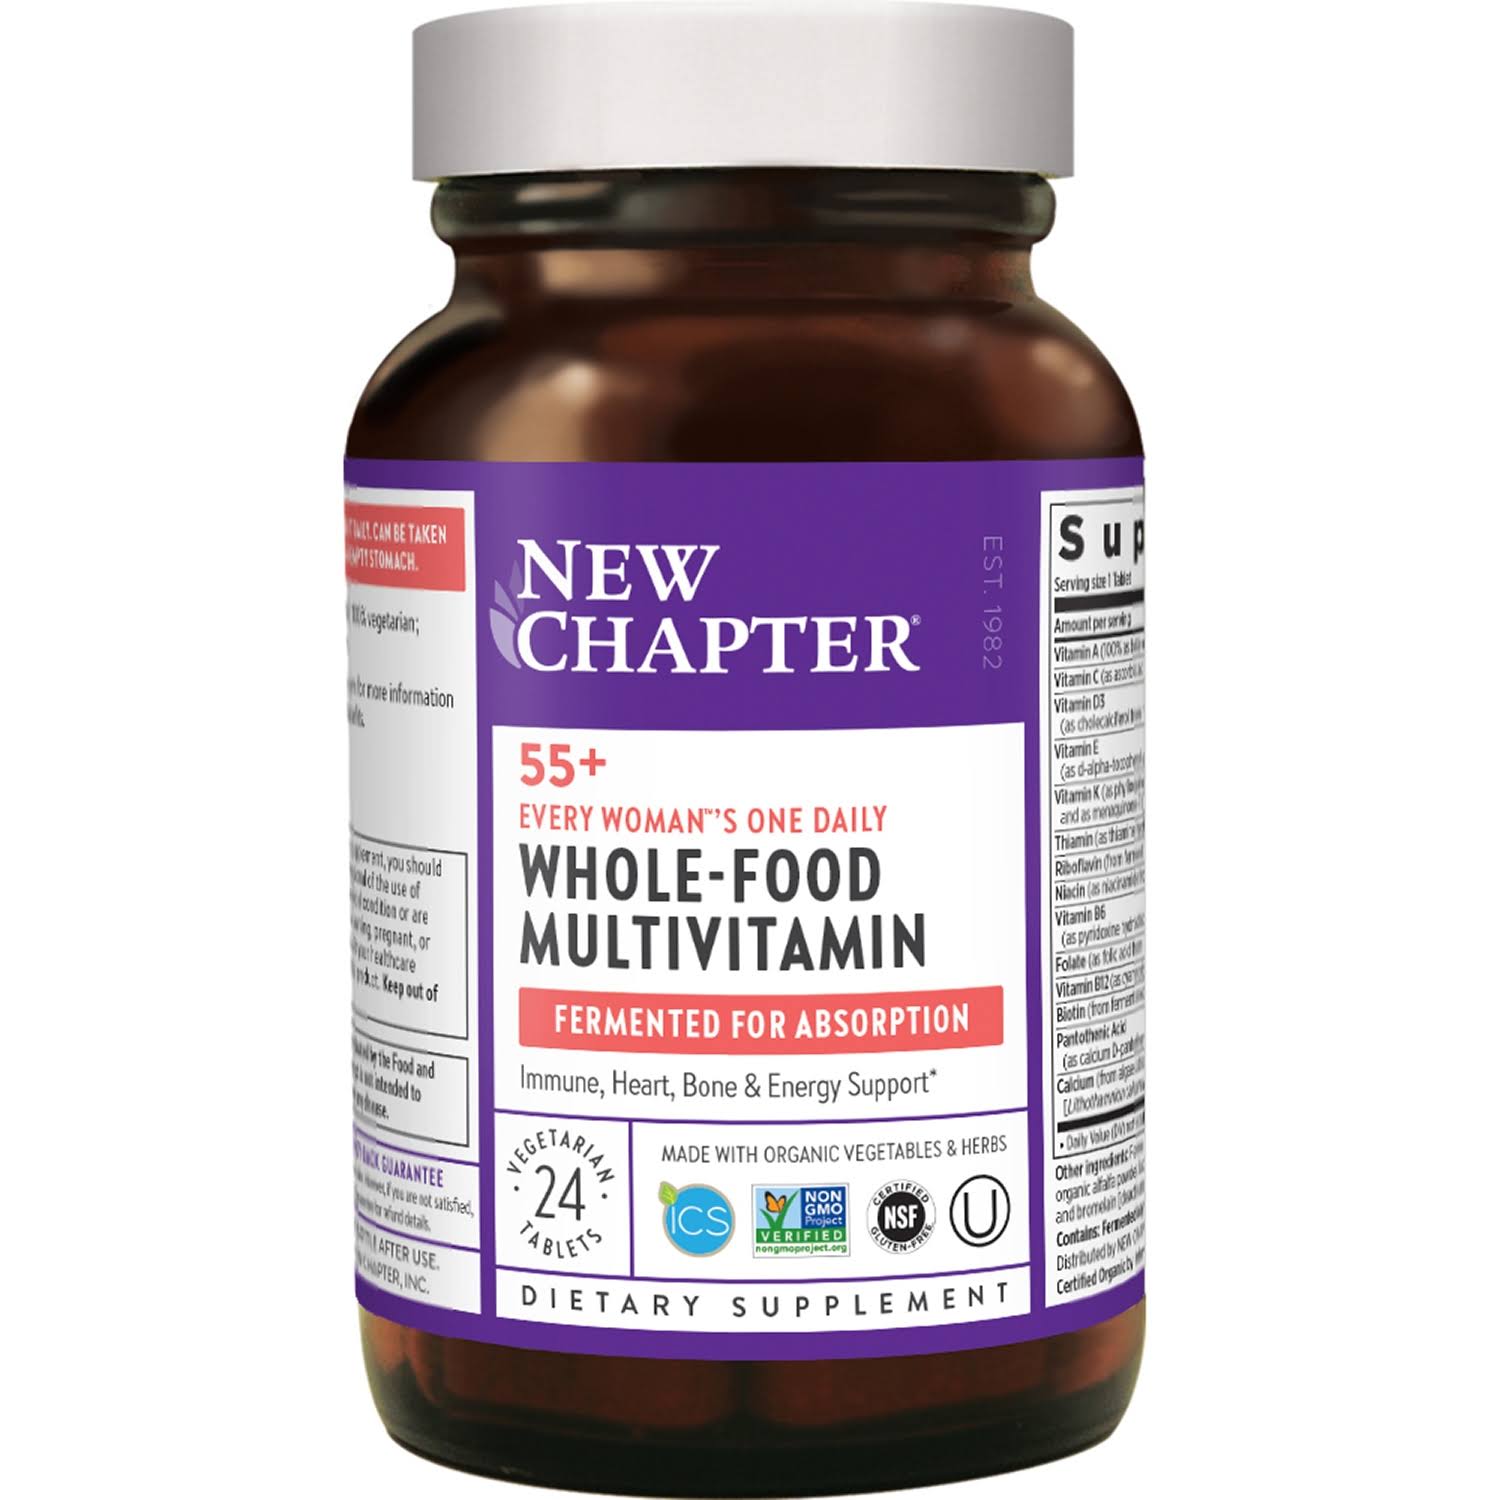 New Chapter Multivitamin for Women 50 Plus - Every Woman's One Daily 5